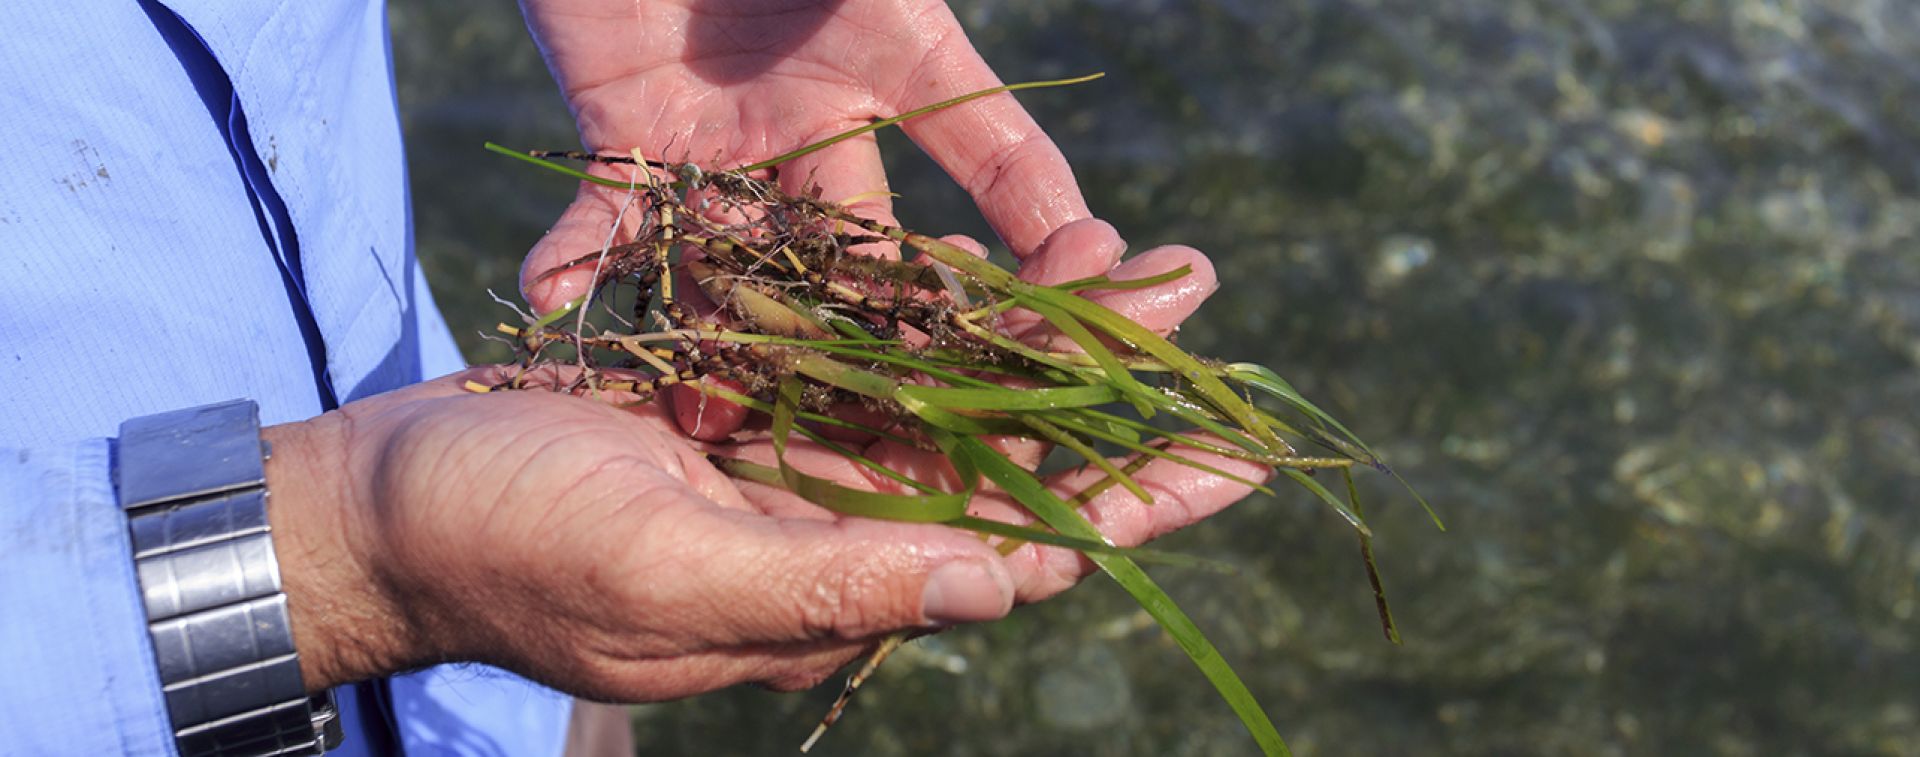 Hands holding seagrass